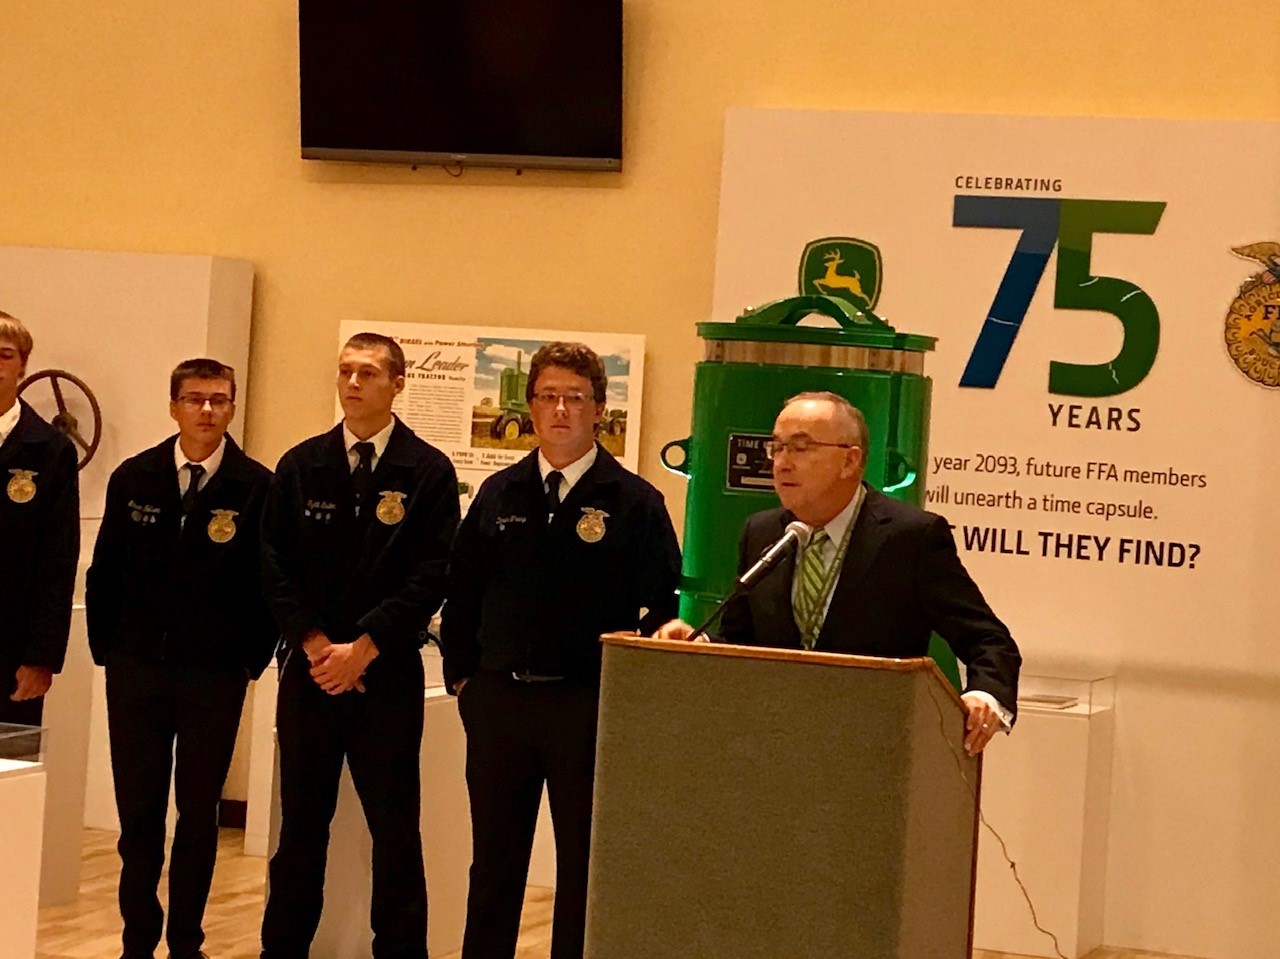 John Deere Celebrates Its 75-Year Partnership with the FFA with $75K Community Engagement Grant